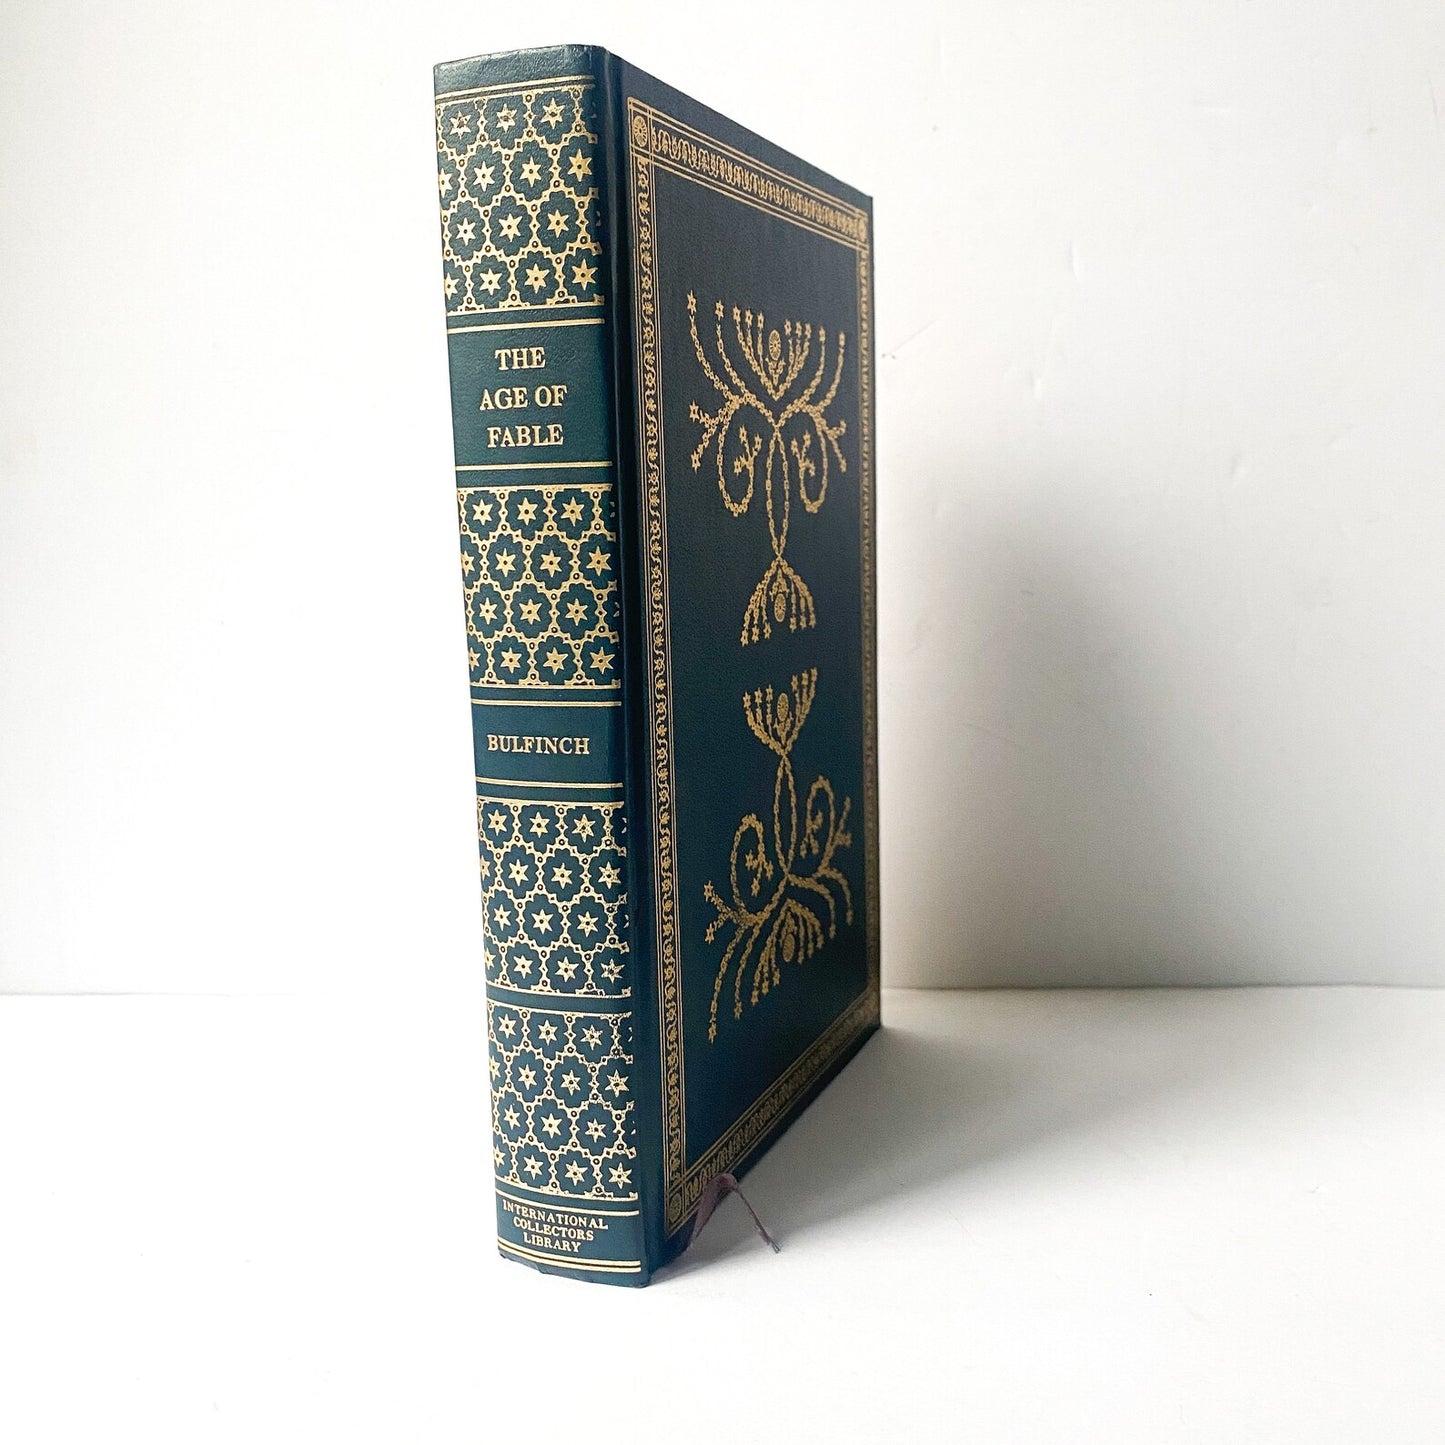 Bulfinch’s Mythology, The Age of Fable, Vintage Book, International Collectors Library Edition